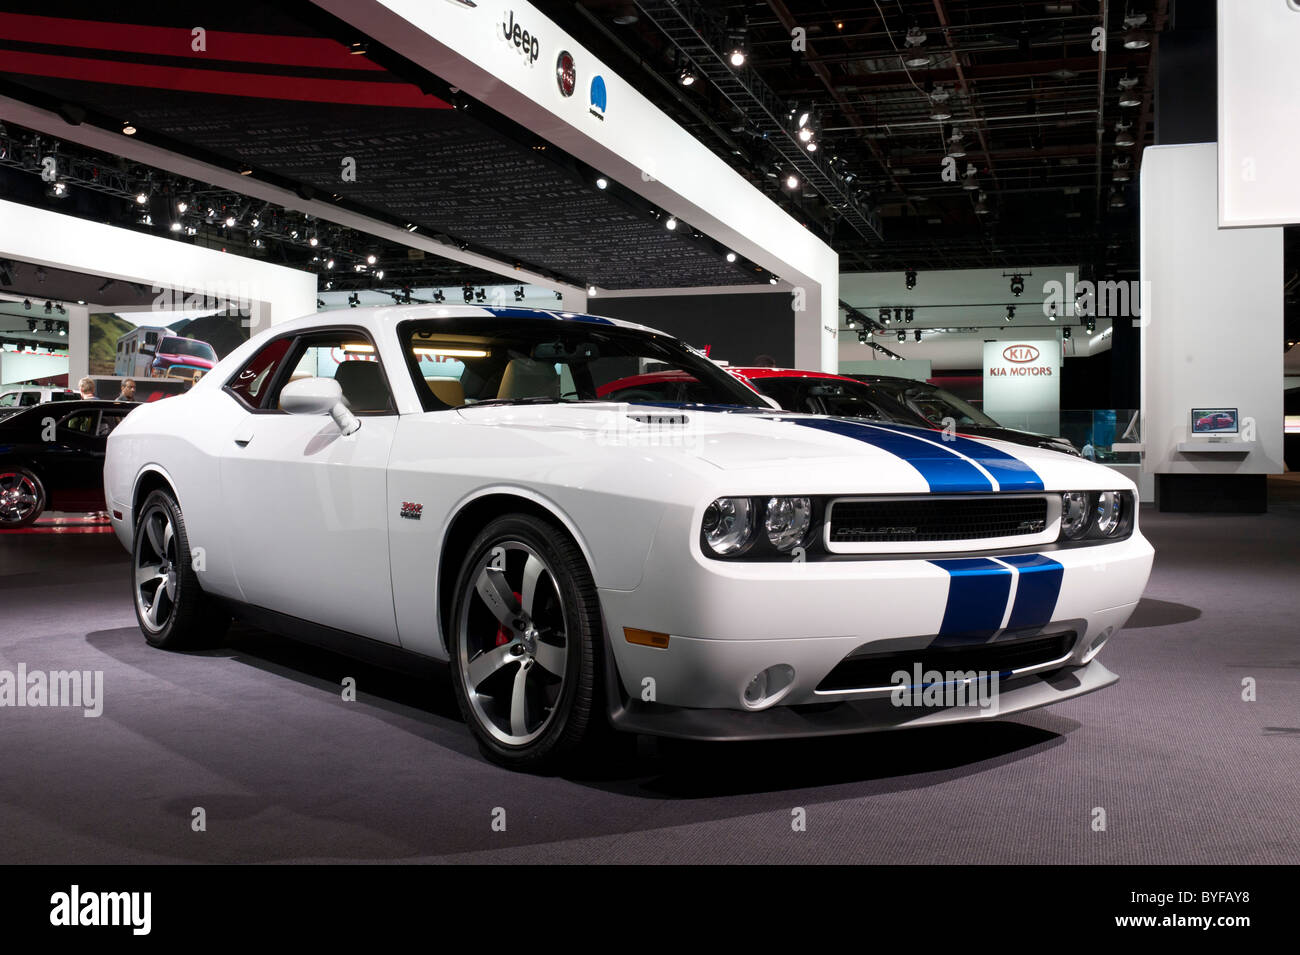 Dodge Challenger SRT-8 at the 2011 North American International Auto Show in Detroit Stock Photo